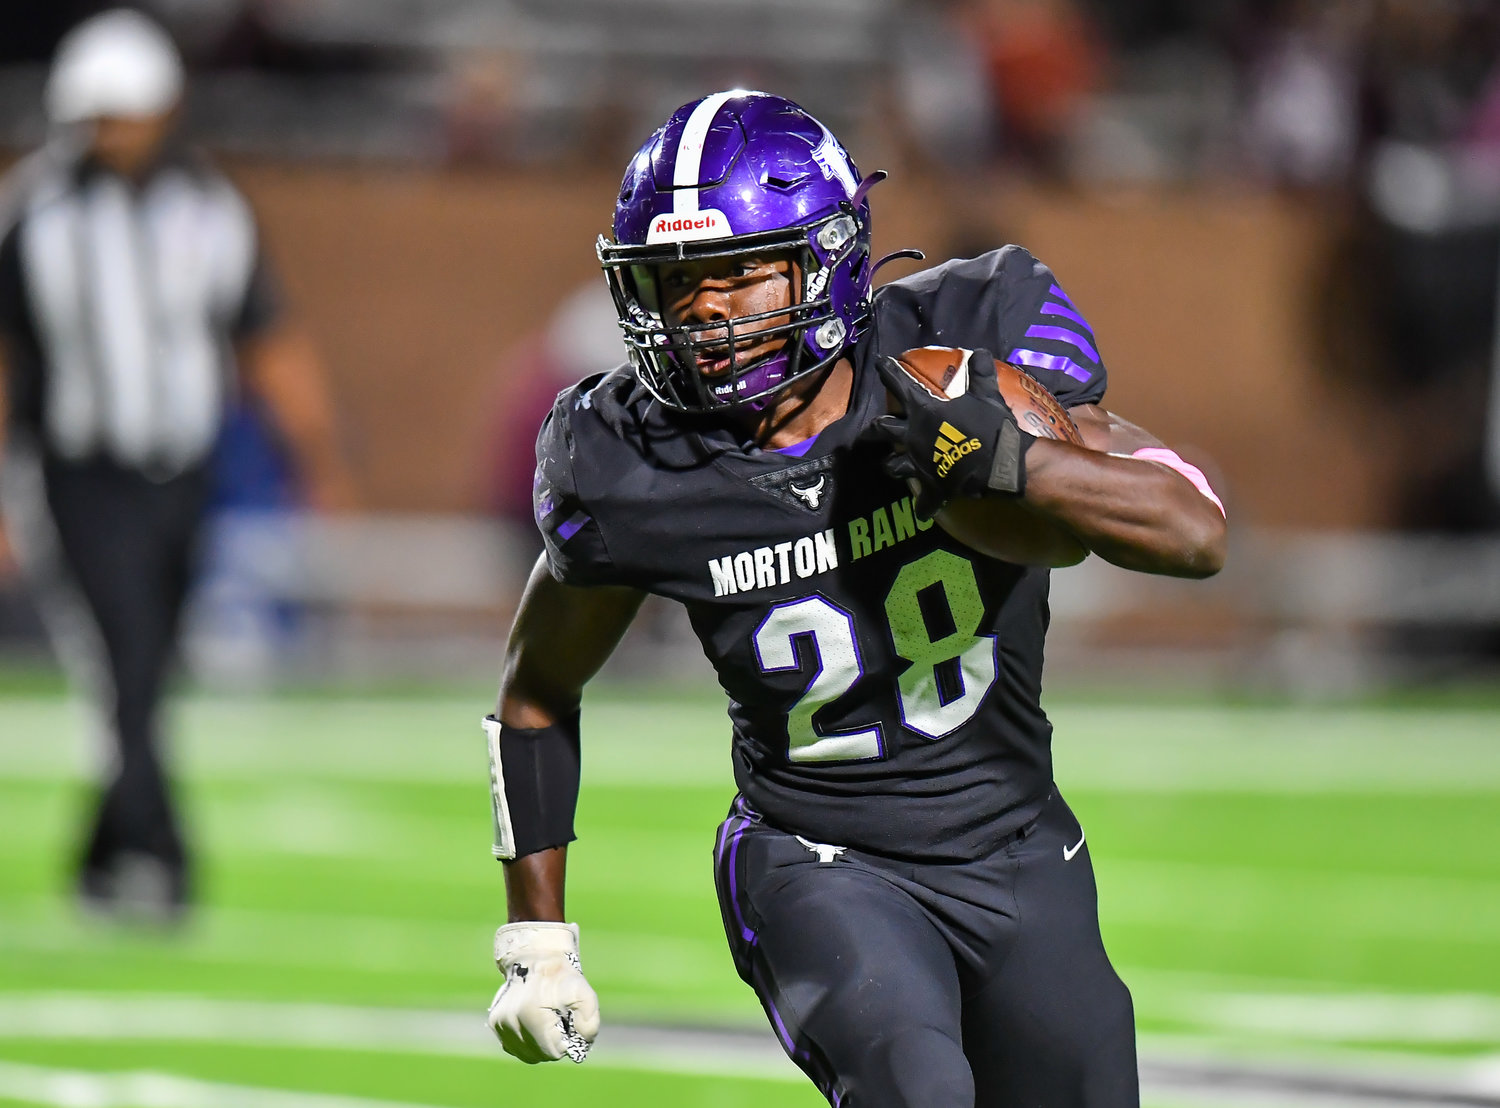 Katy, Tx. Oct 29, 2021: Morton Ranch's  Ryan Hall #28rushes to the outside during a conference game between Cinco Ranch and Morton Ranch at Rhodes Stadium in Katy. (Photo by Mark Goodman / Katy Times)